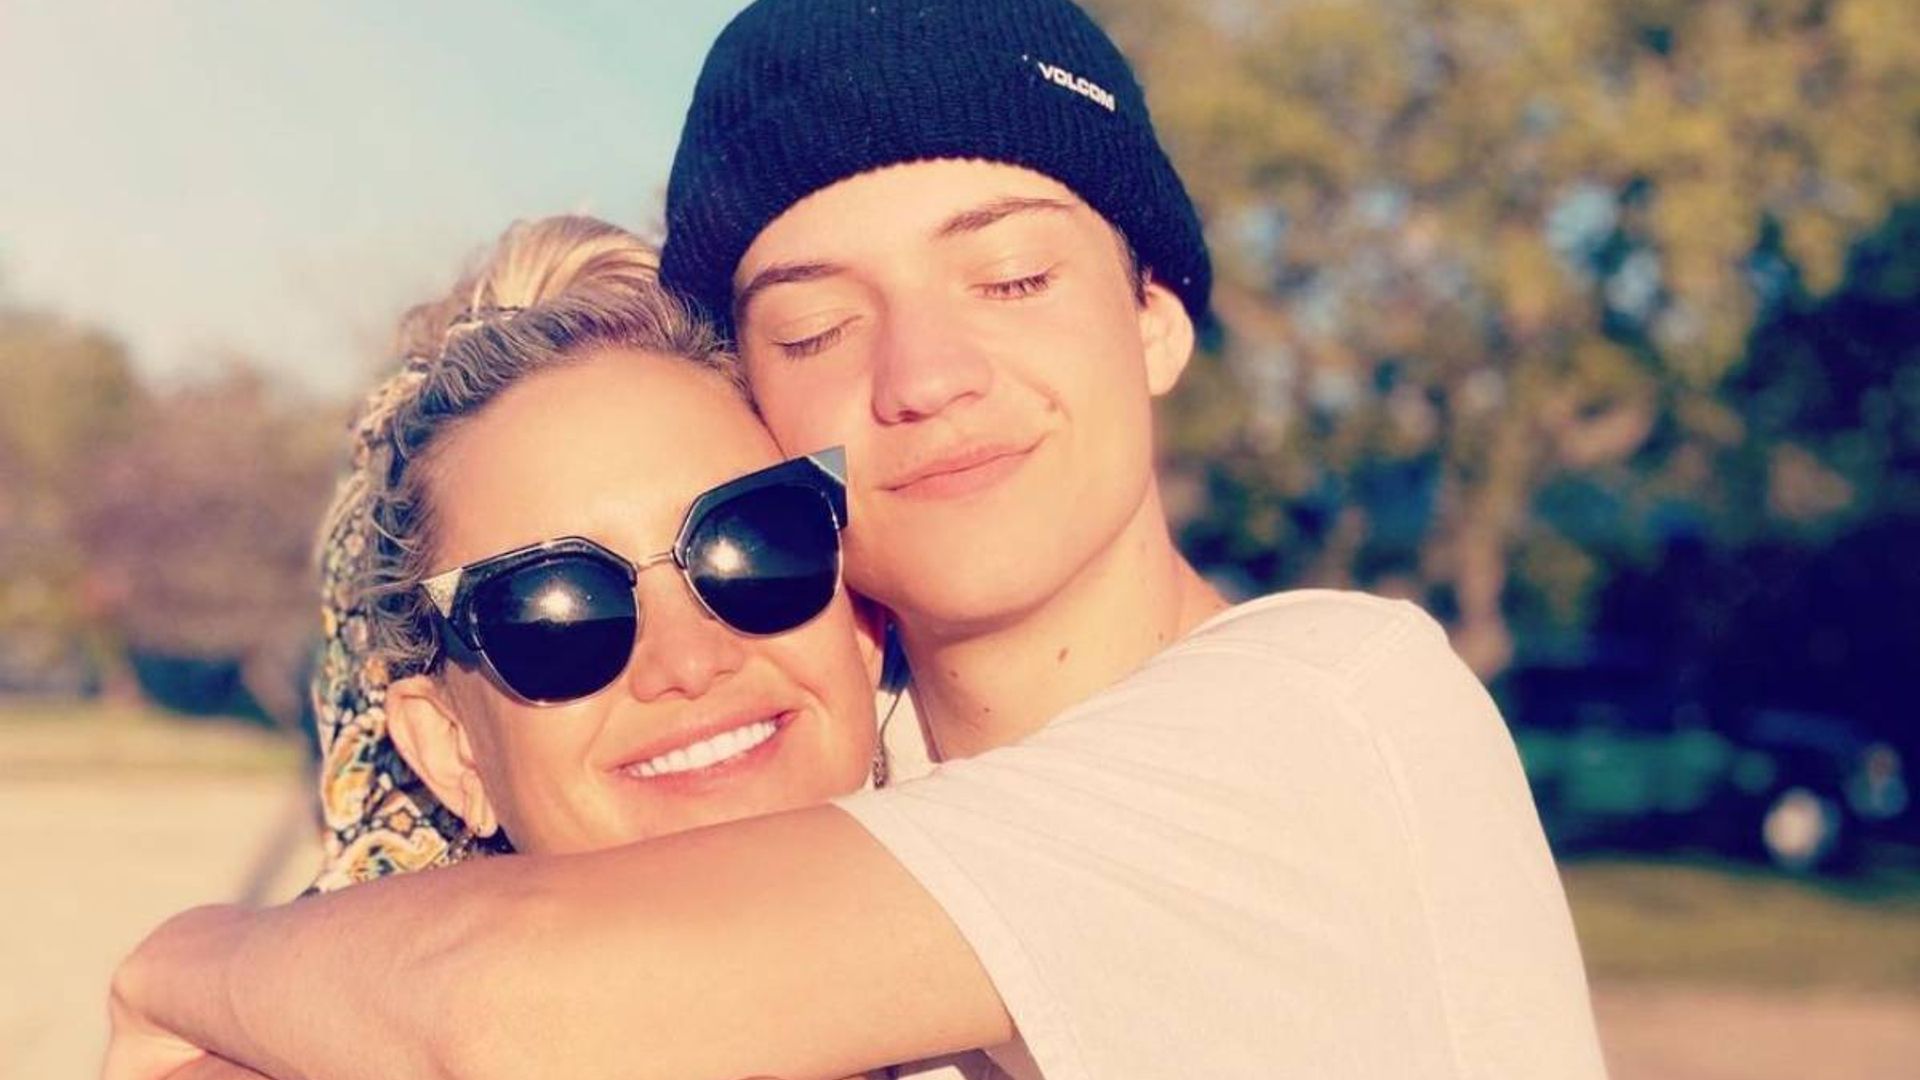 Kate Hudson's teenage son Ryder goes Instagram official with girlfriend - and his famous mom | HELLO!